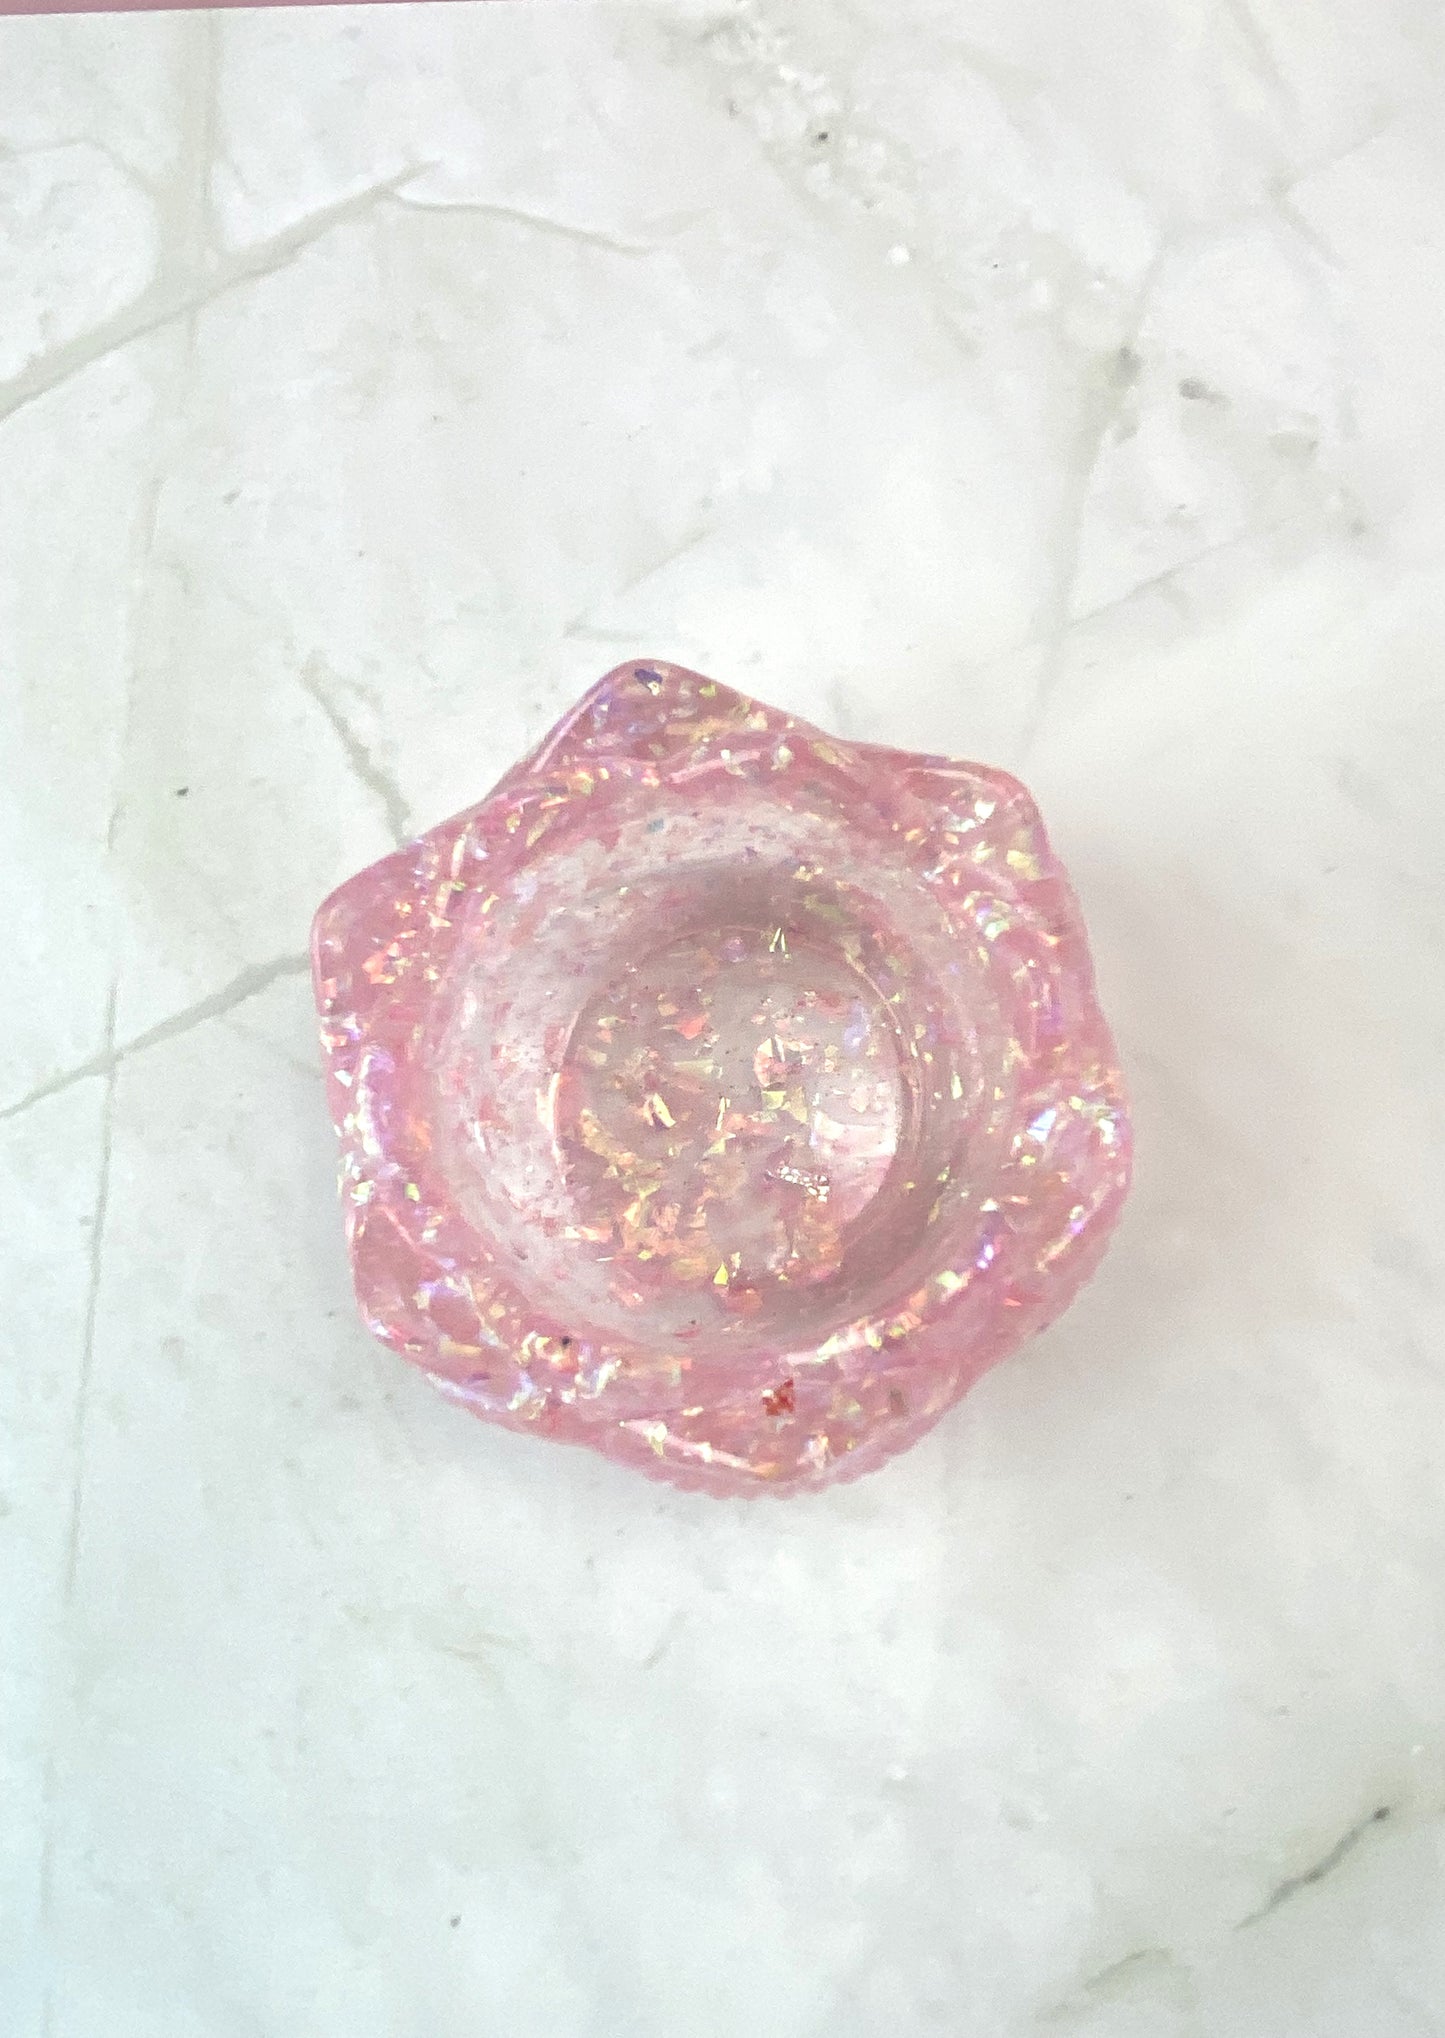 Baby Pink Glitter Lotus Candle Holder | Handmade Home Decor